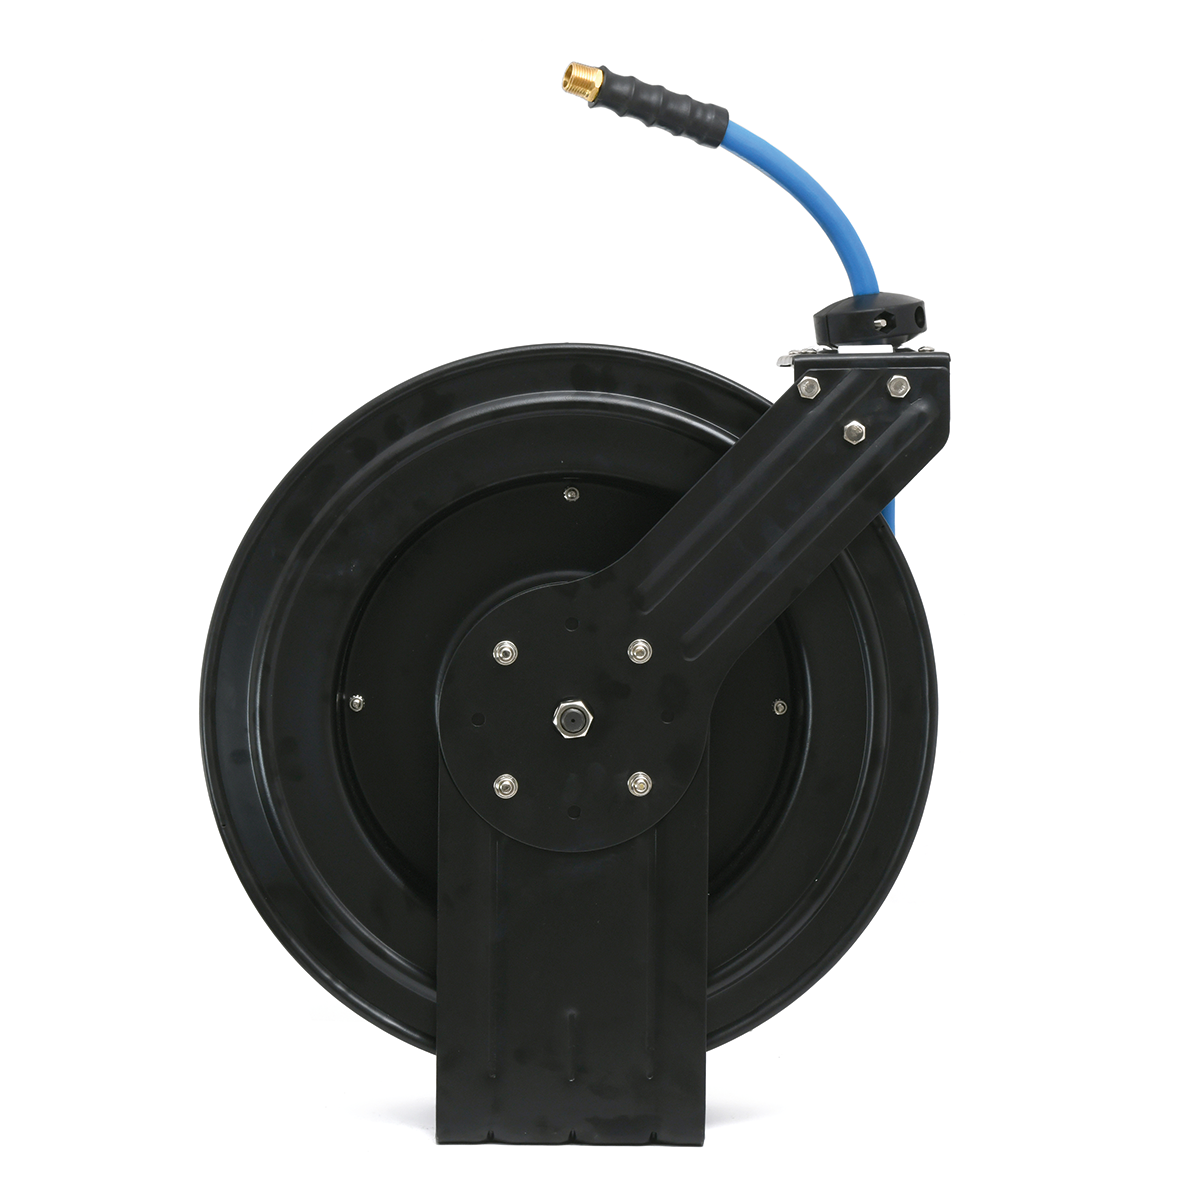 BluBird Air Hose Reel 3/8" Retractable Steel Construction with Rubber Hose 300 PSI